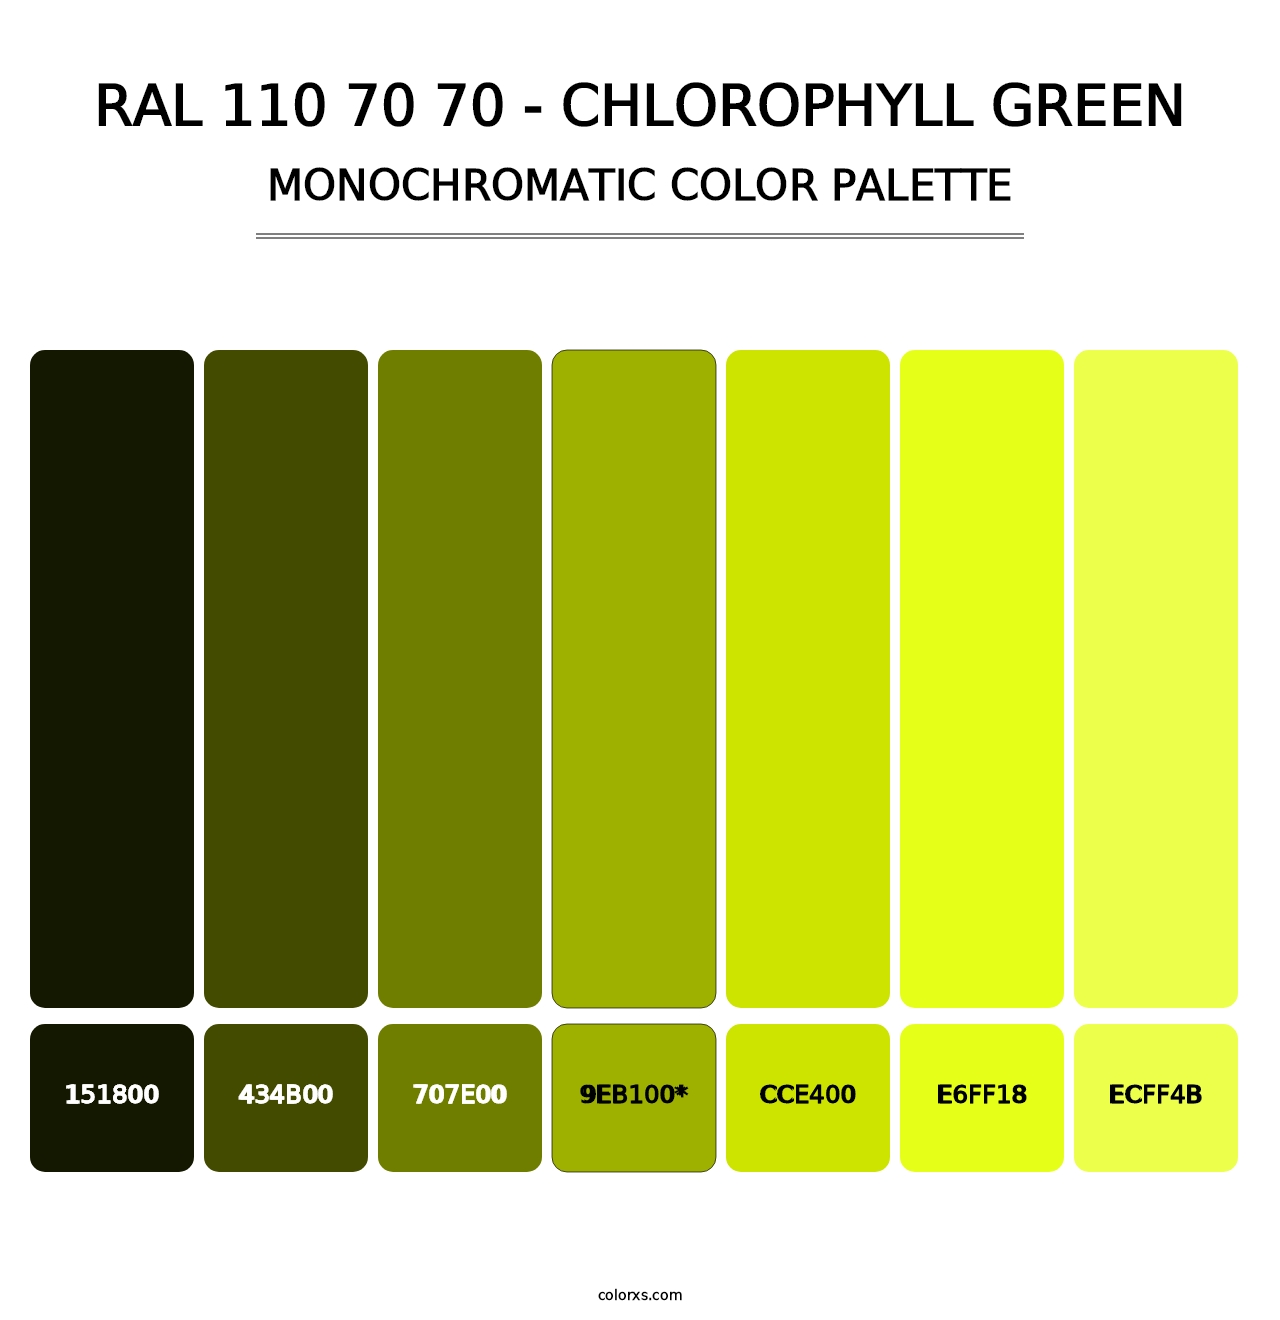 RAL 110 70 70 - Chlorophyll Green - Monochromatic Color Palette